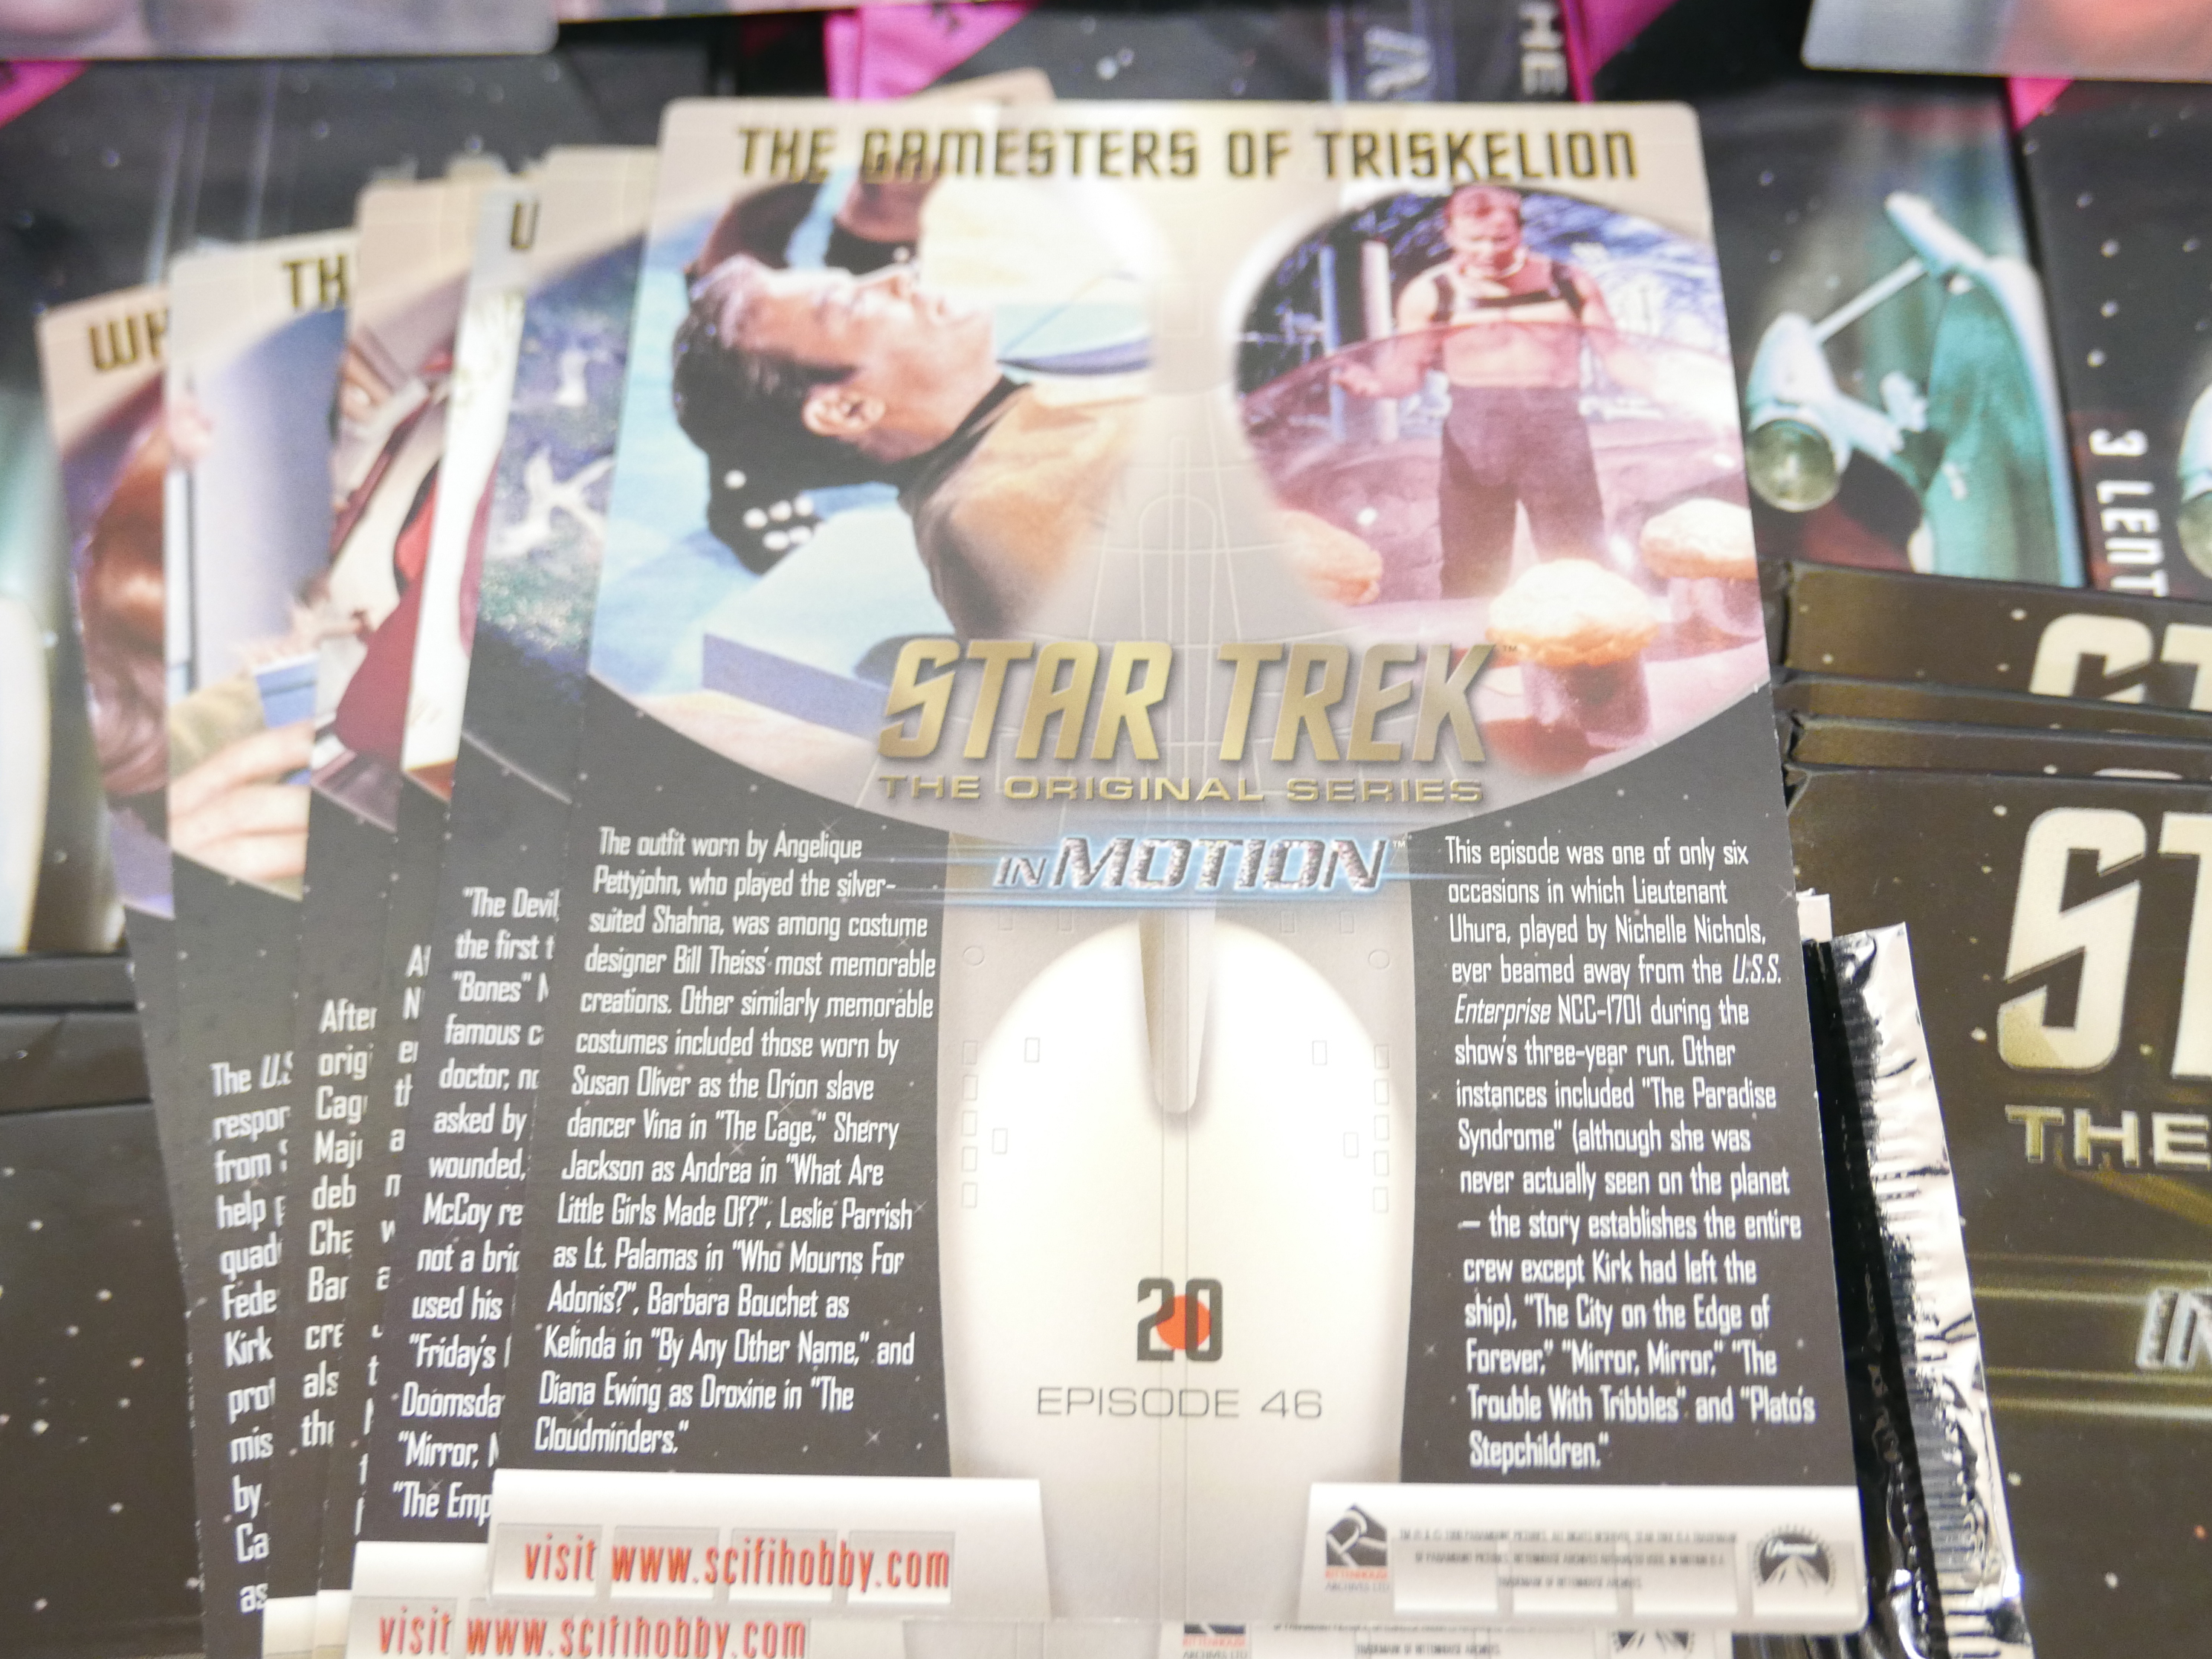 Thirty unopened packets of Star Wars The Original Series in Motion Premiere Edition lenticular card - Image 3 of 4